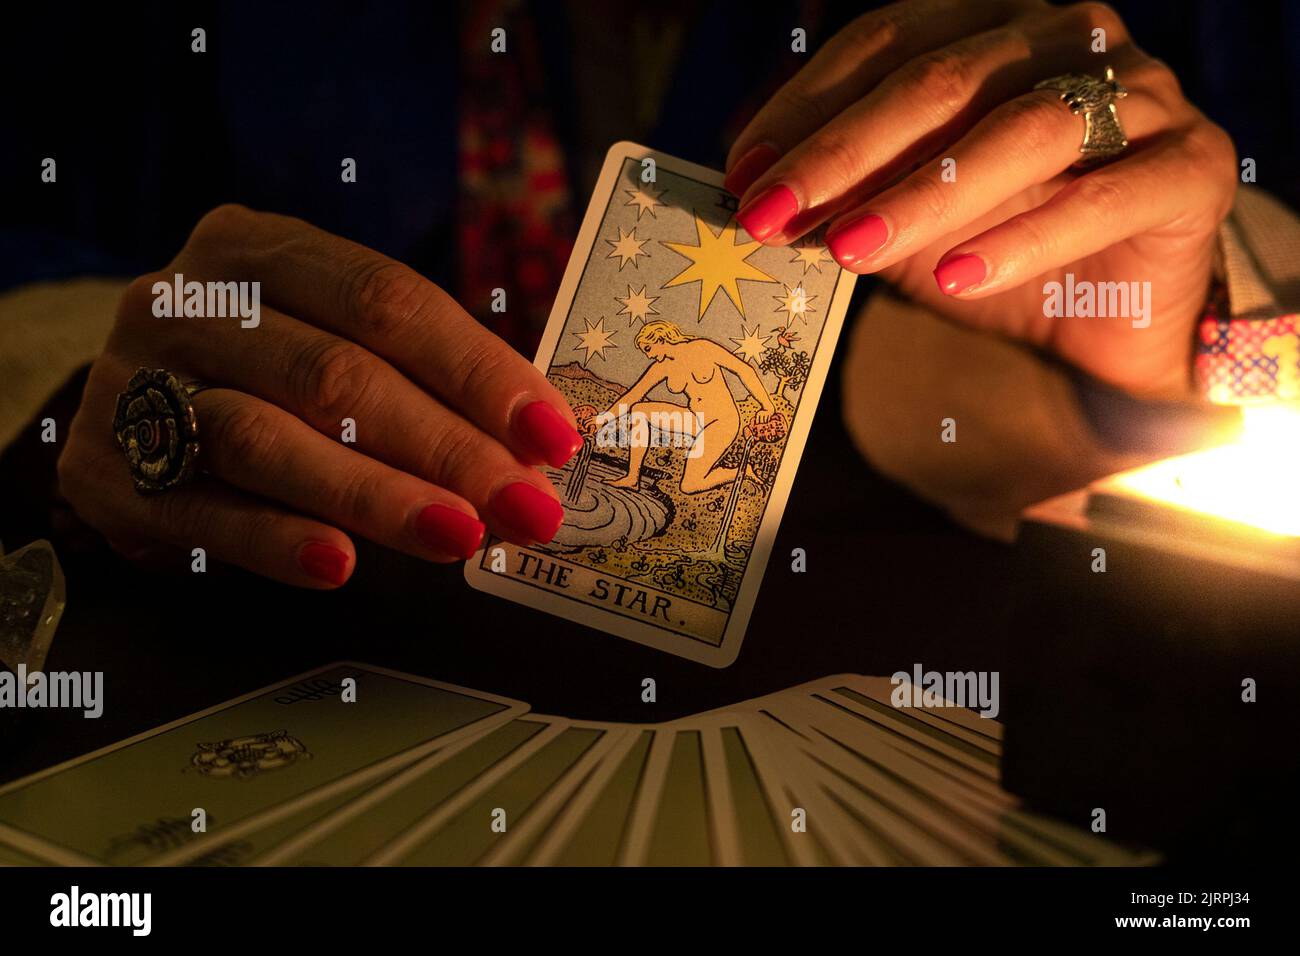 Fortune teller female hands showing The Star tarot card, symbol of hope, during a reading. Close-up with candle light, moody atmosphere. Stock Photo